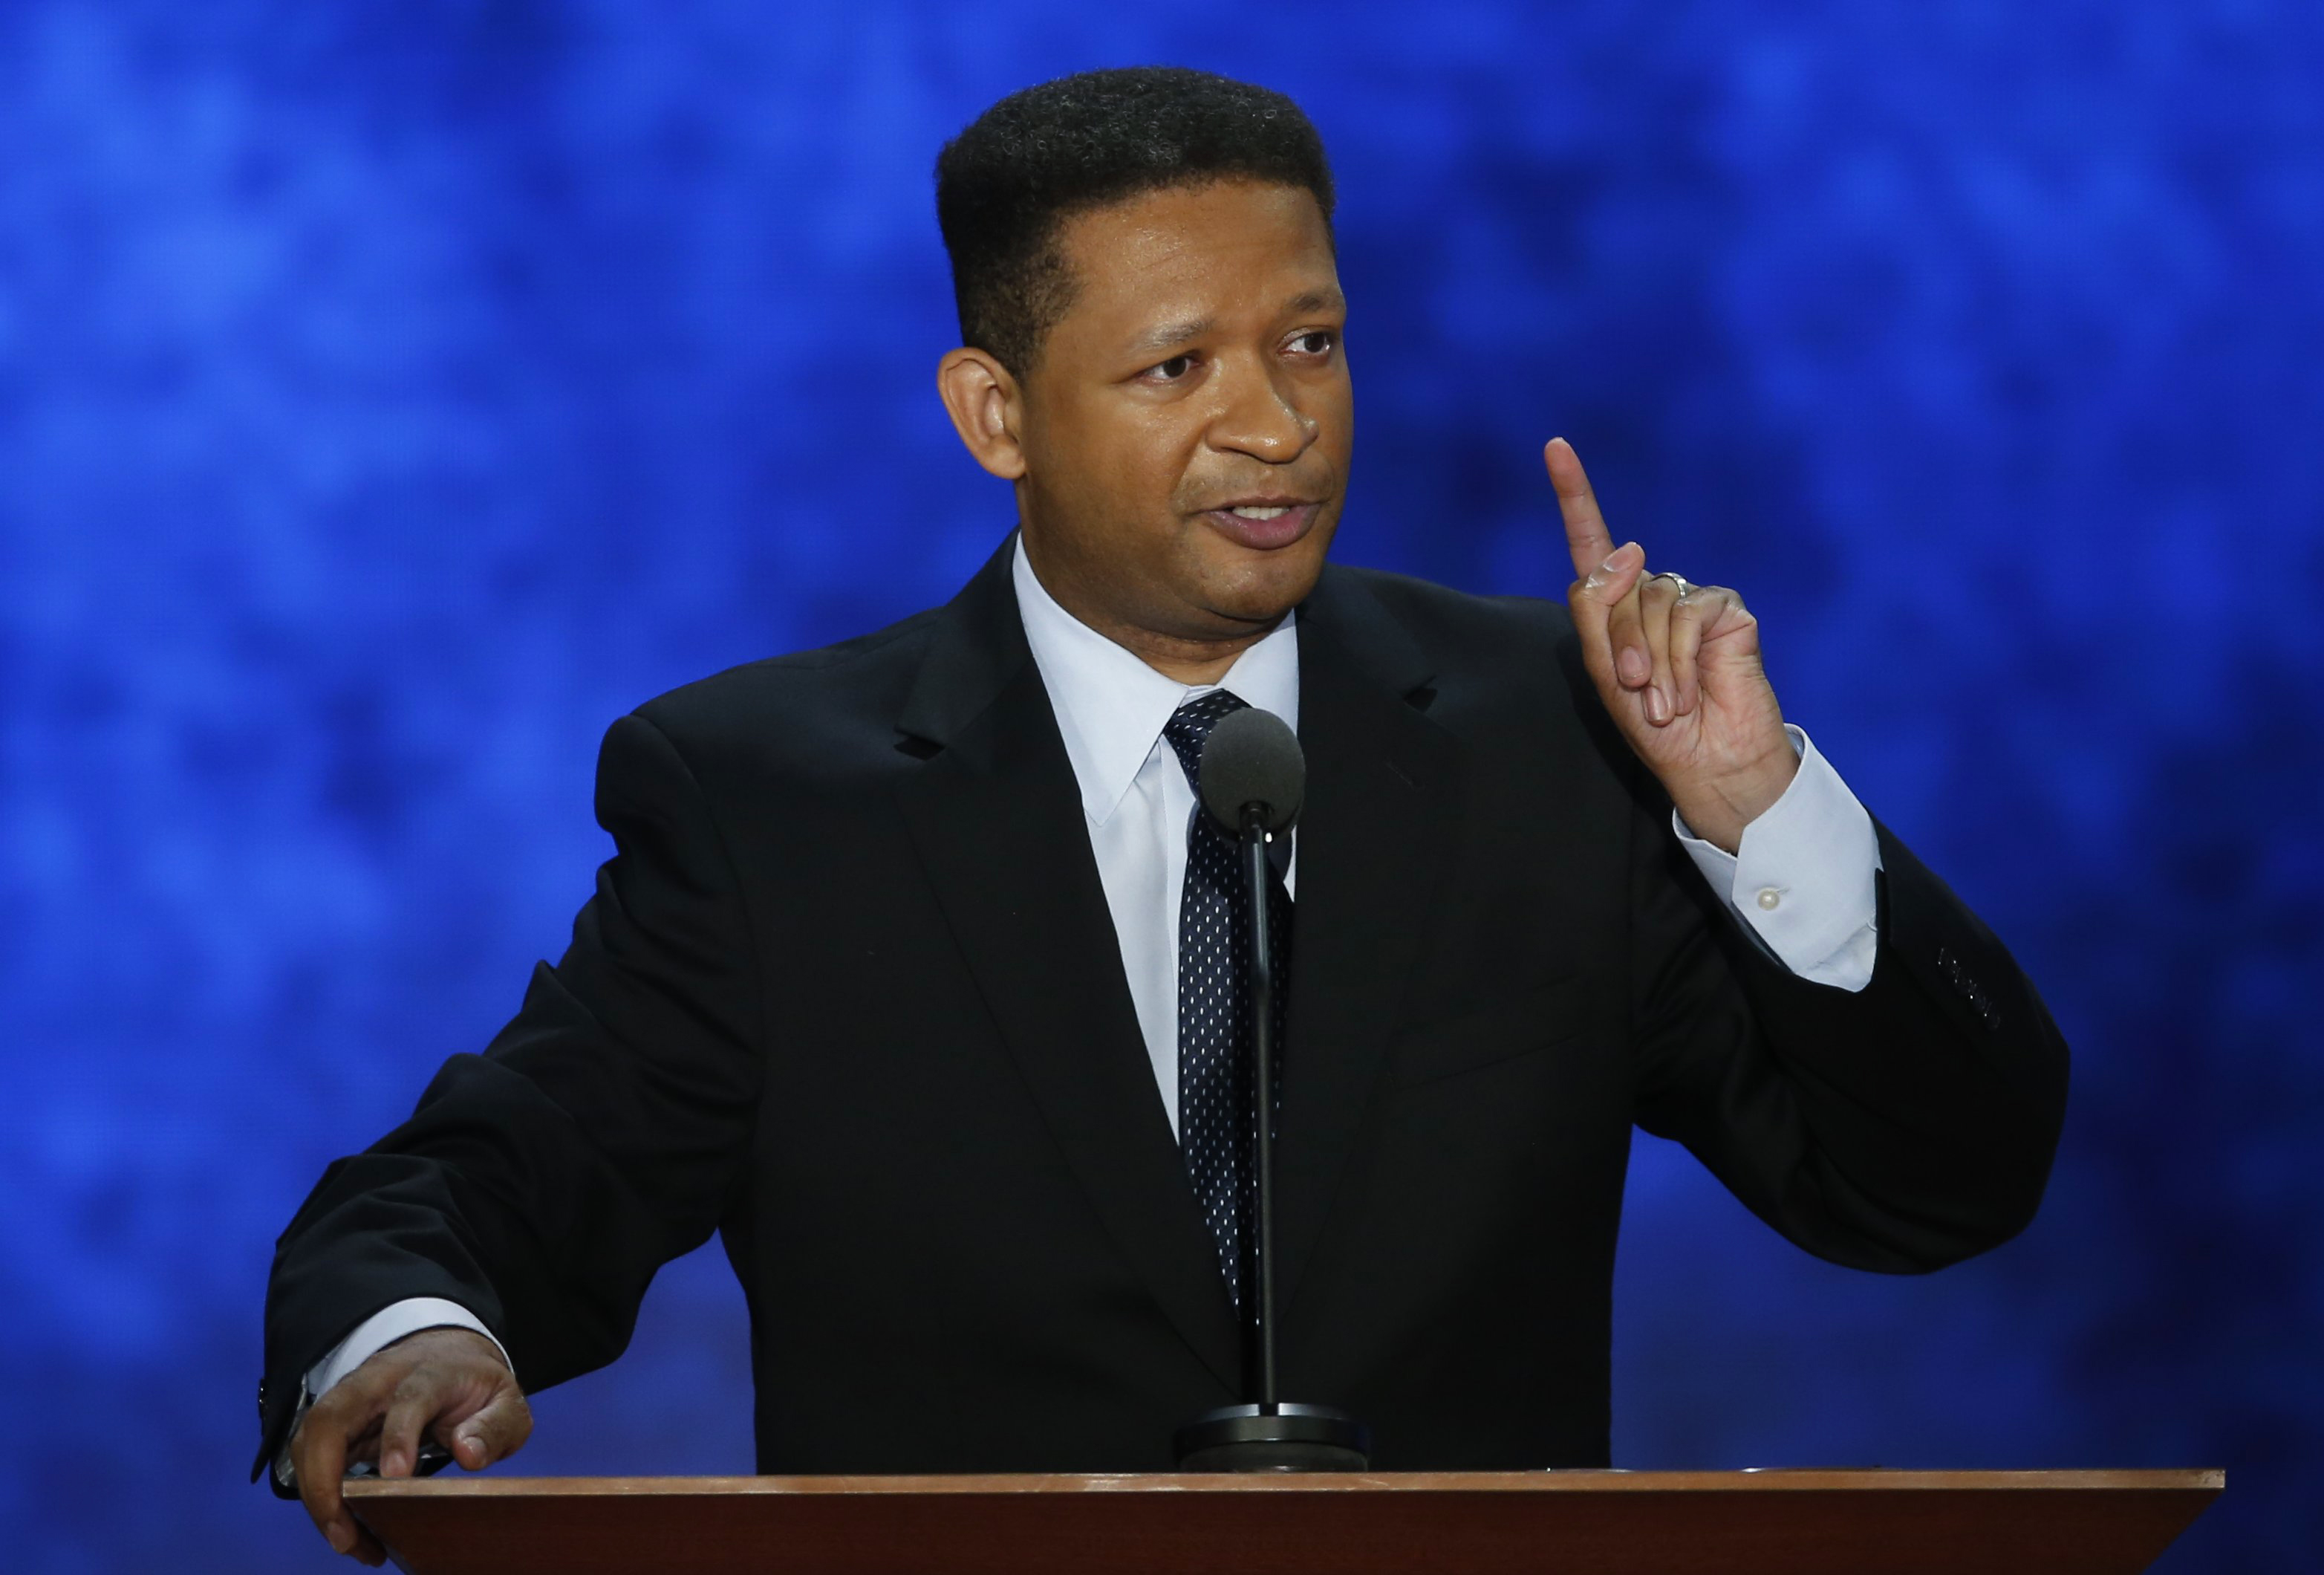 Former U.S. Rep. Artur Davis discusses his support of Republican presidential nominee Mitt Romney during the second session of the Republican National Convention in Tampa, Florida August 28, 2012. REUTERS/Mike Segar